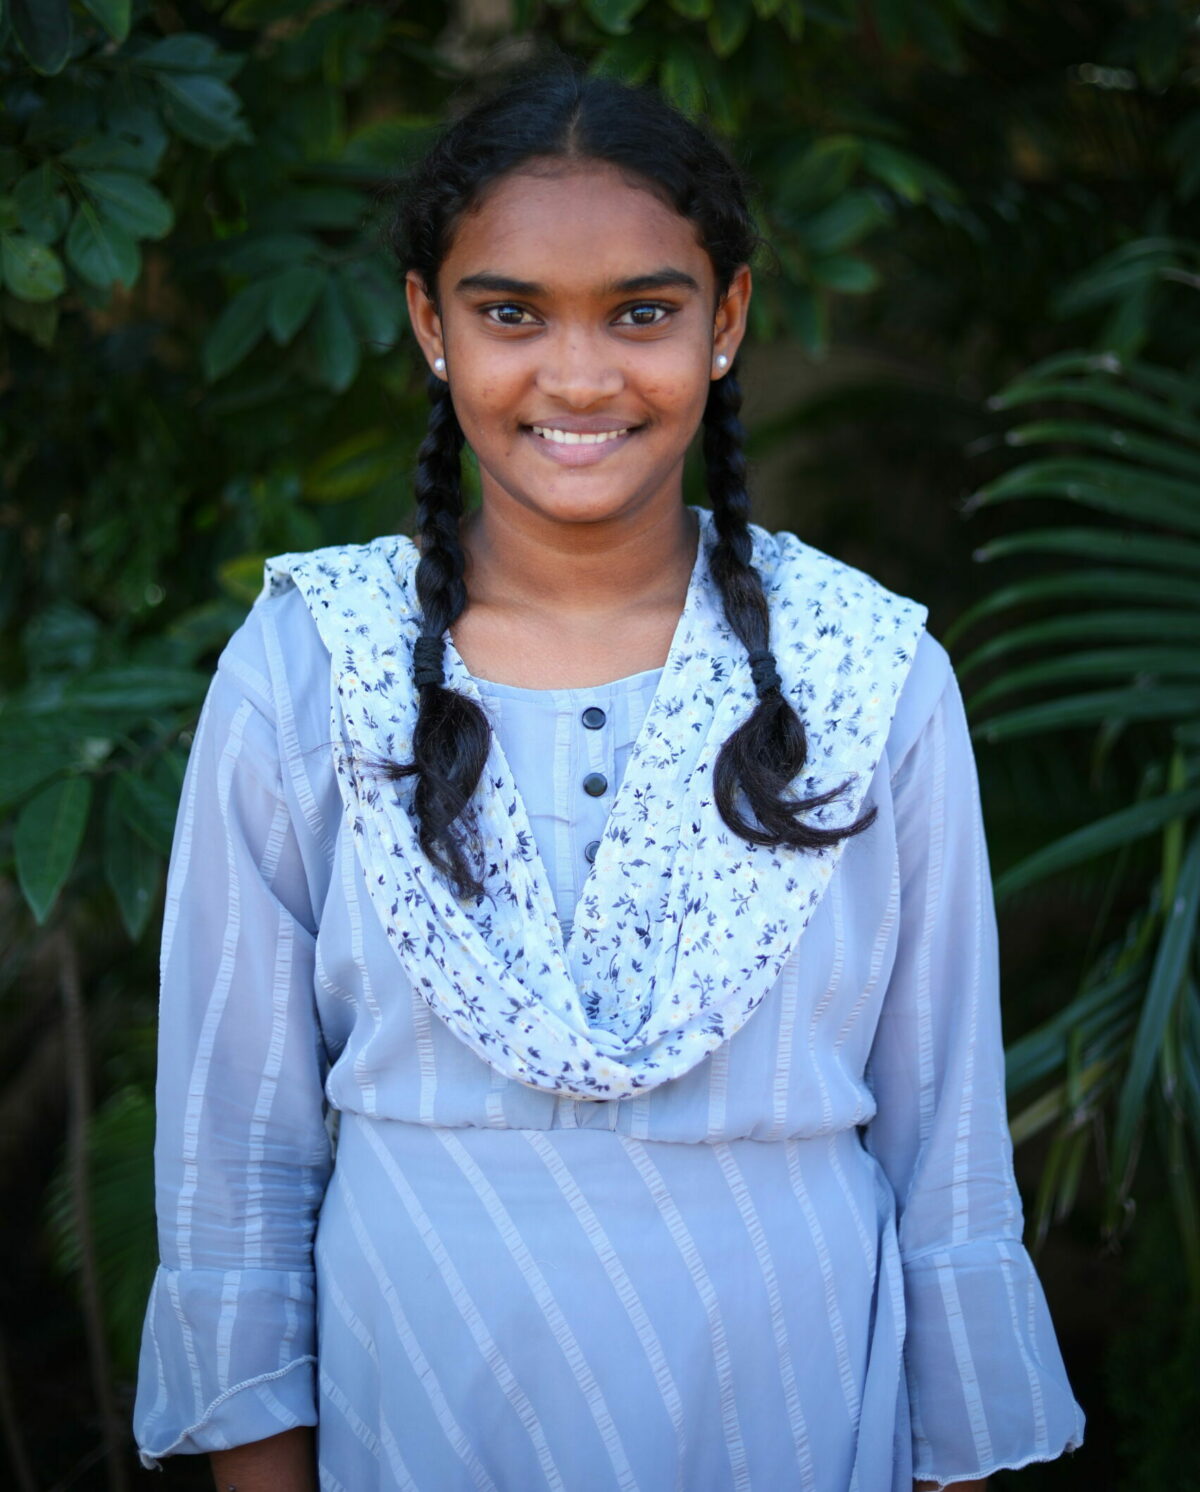 Young Girl from the Children of Faith Home in India